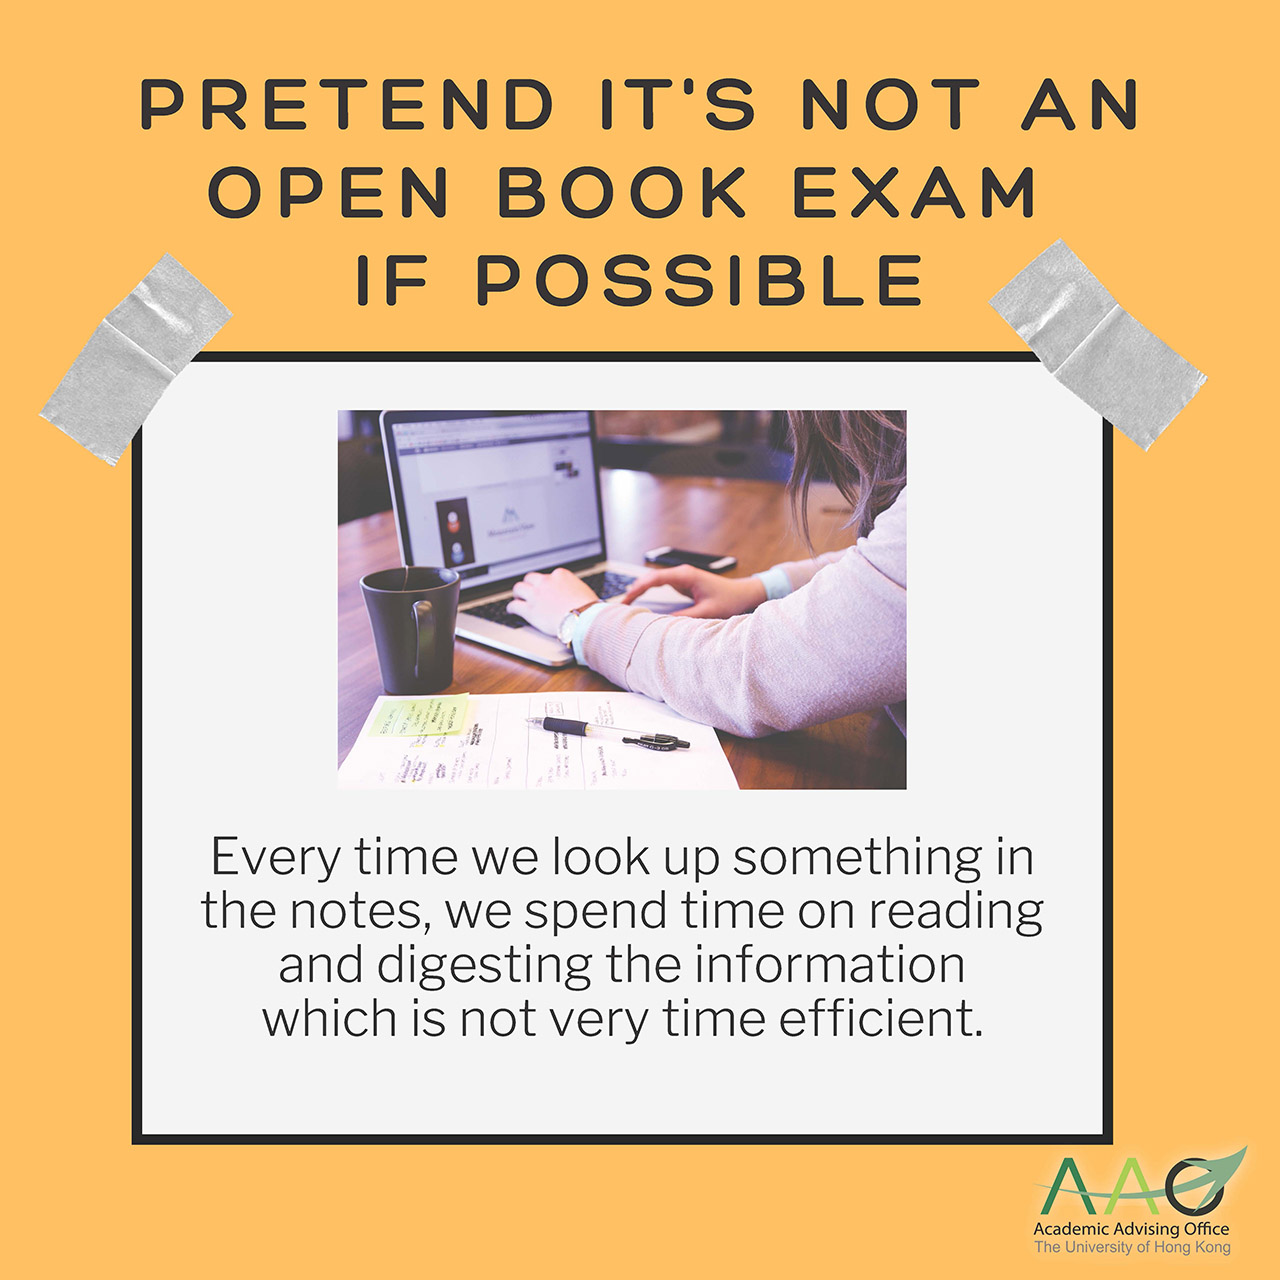 Pretend it's not an open book exam if possible. Every time we look up something in the notes, we spend time on reading and digesting the information which is not very time efficient.